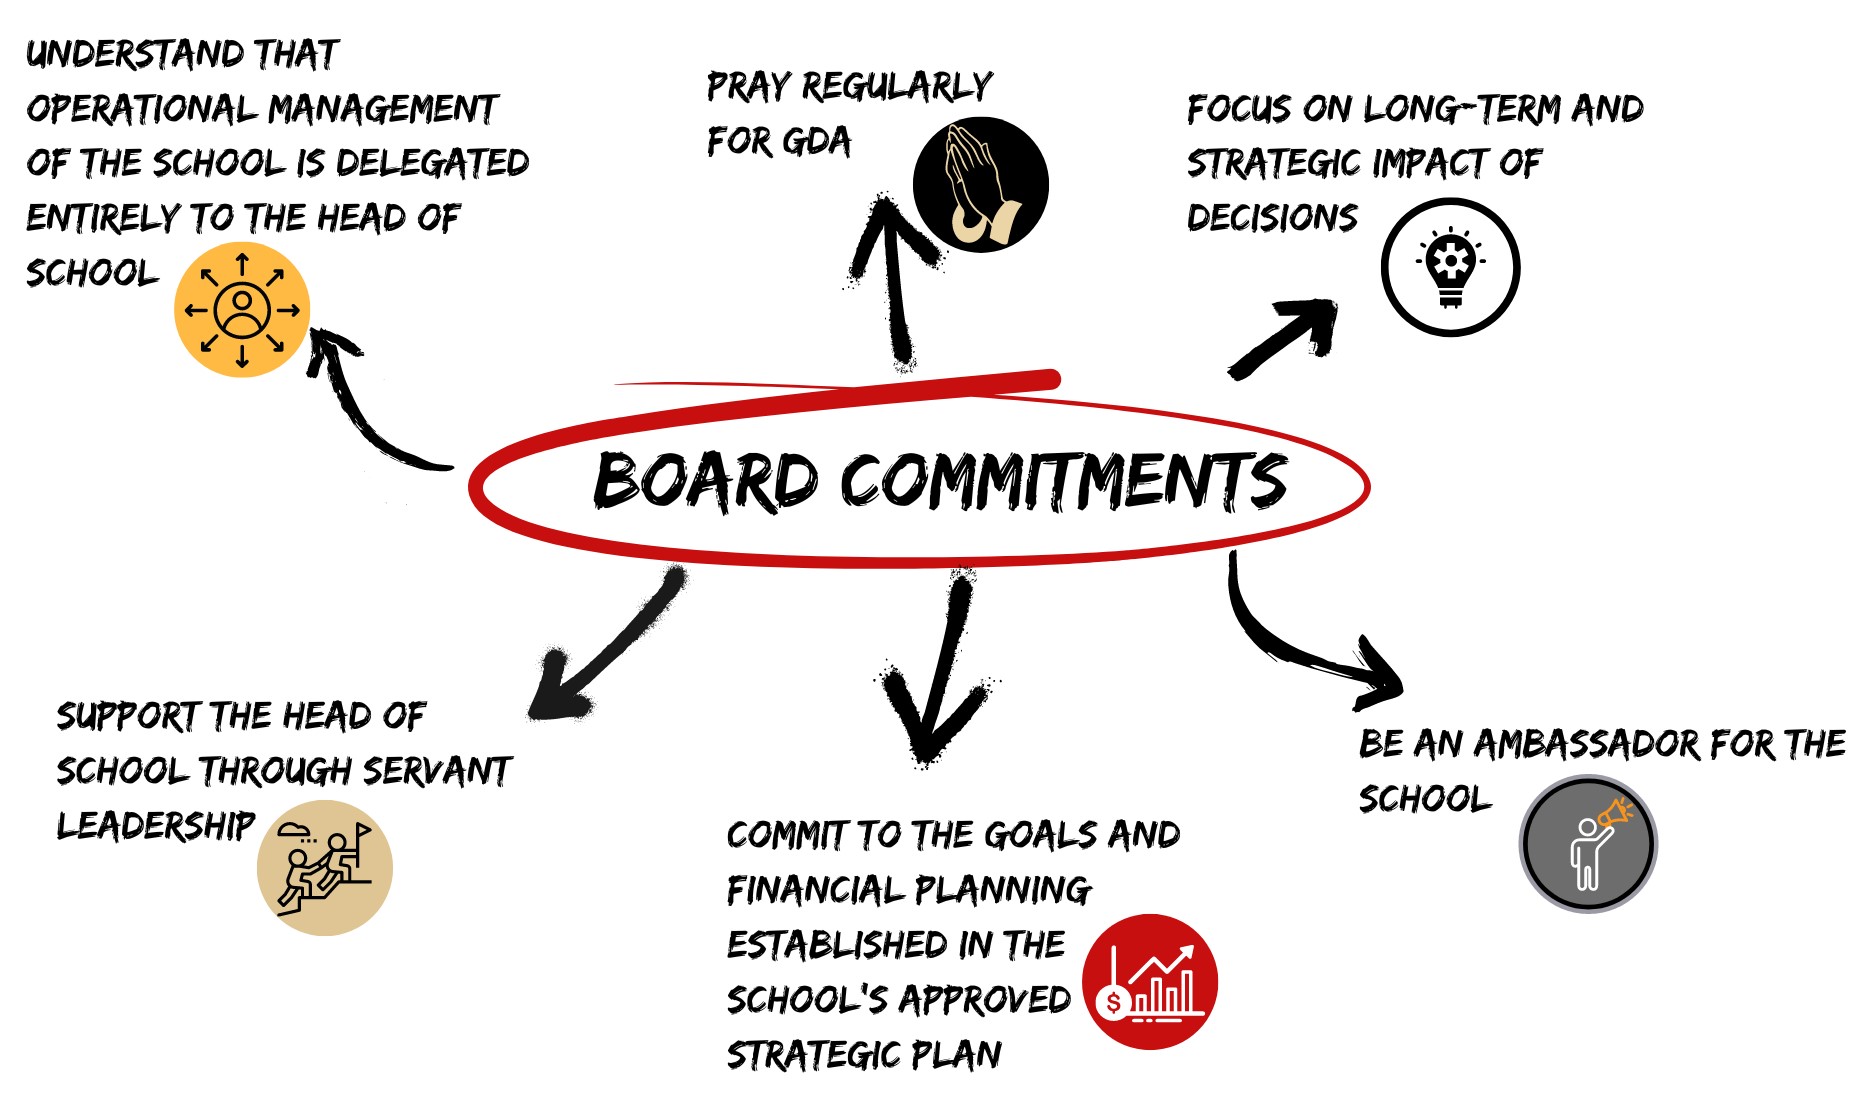 Please contact the Board of Directors by email: board@gloriadeoacademy.net.